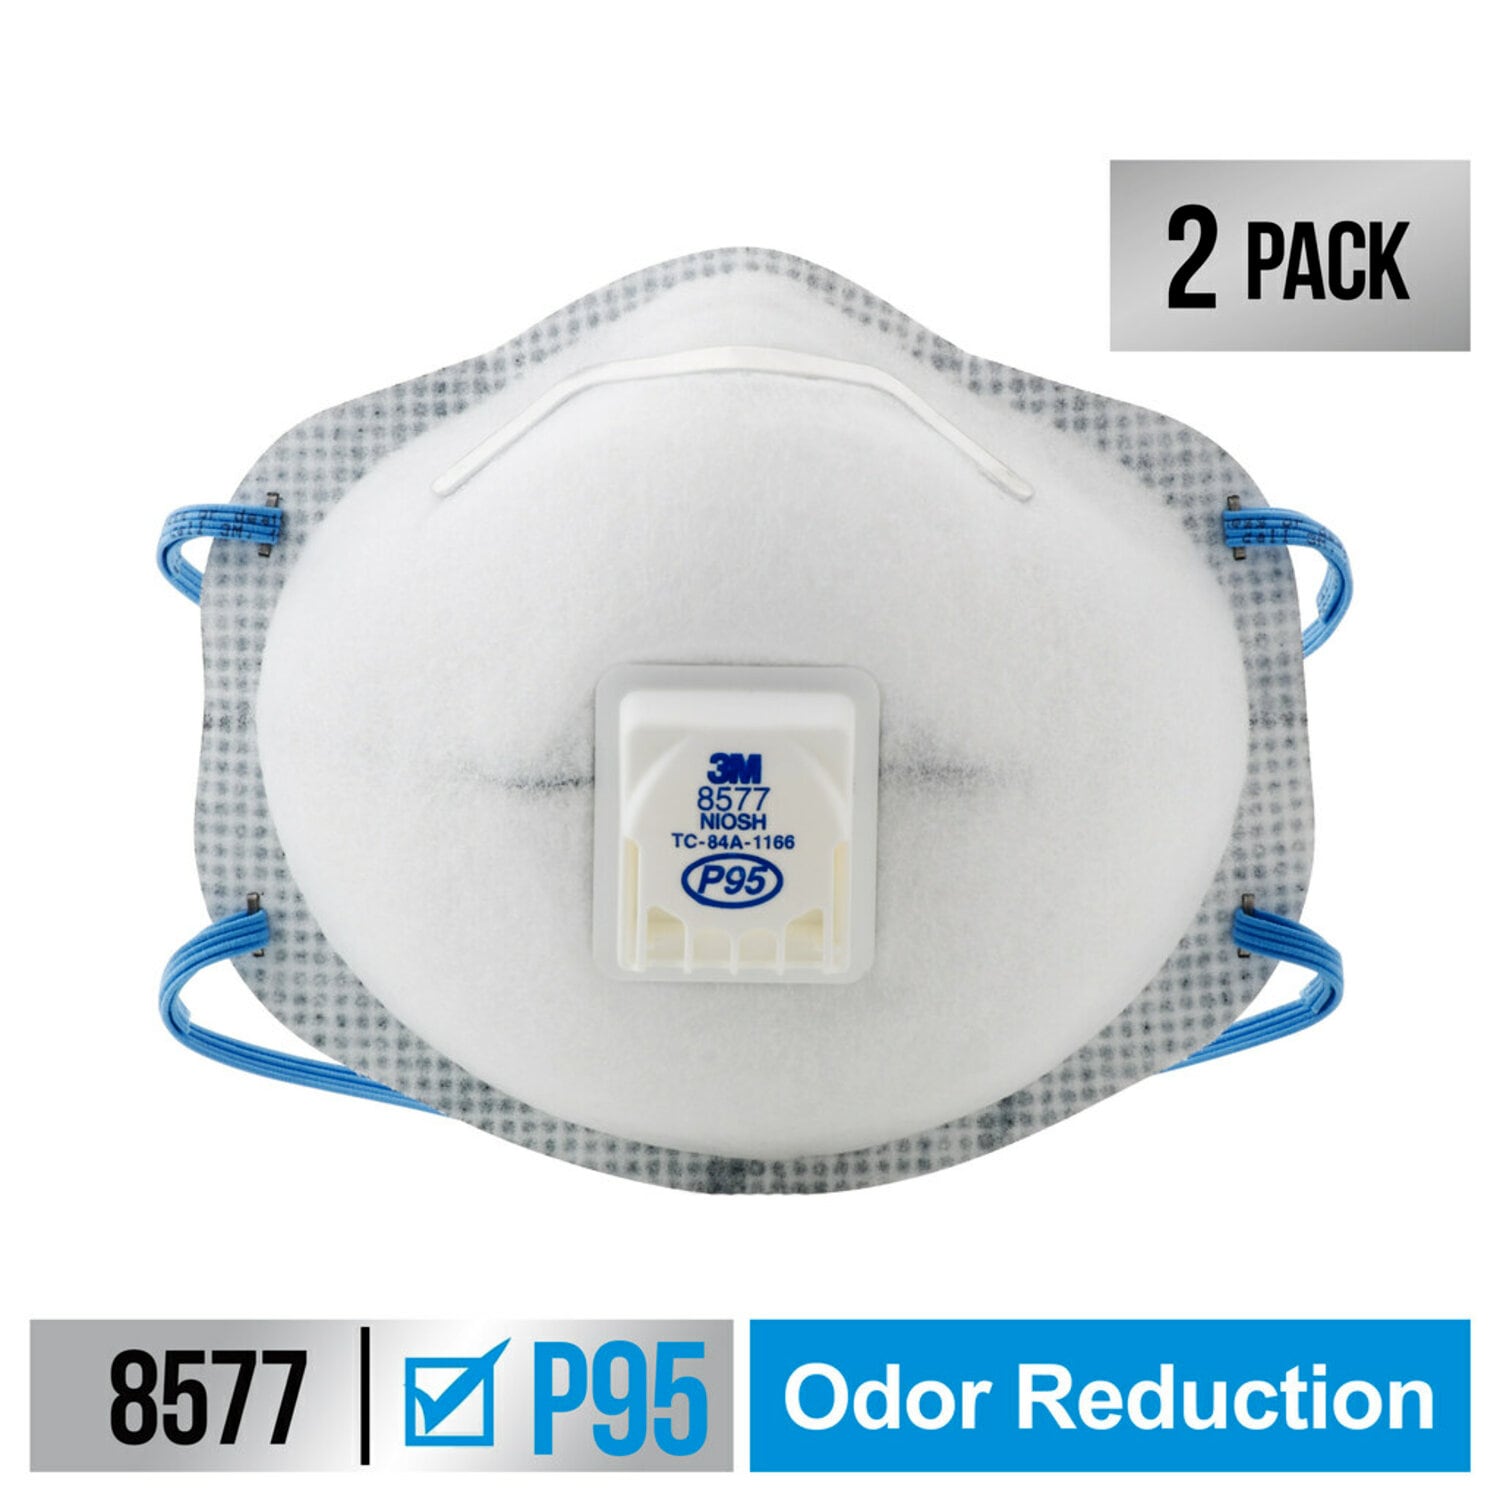 7100189893 - 3M Paint Odor Valved Respirator, 8577P2-DC-PS, 2 eaches/pack, 6
packs/case